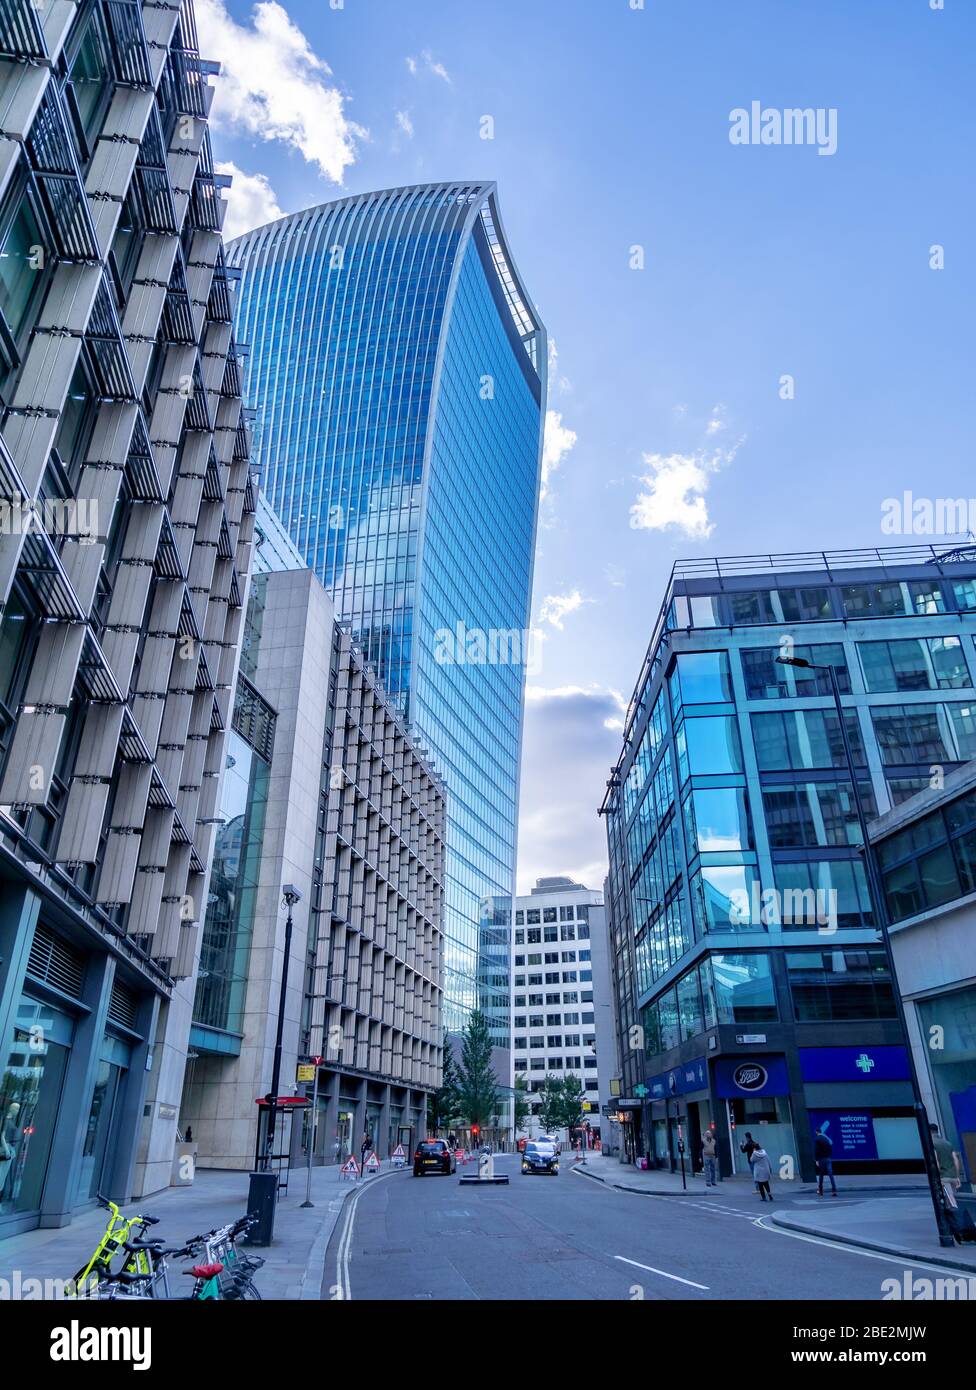 London, England, UK - September 8, 2019: Modern futuristic building Walkie Talkie in the city of London Stock Photo